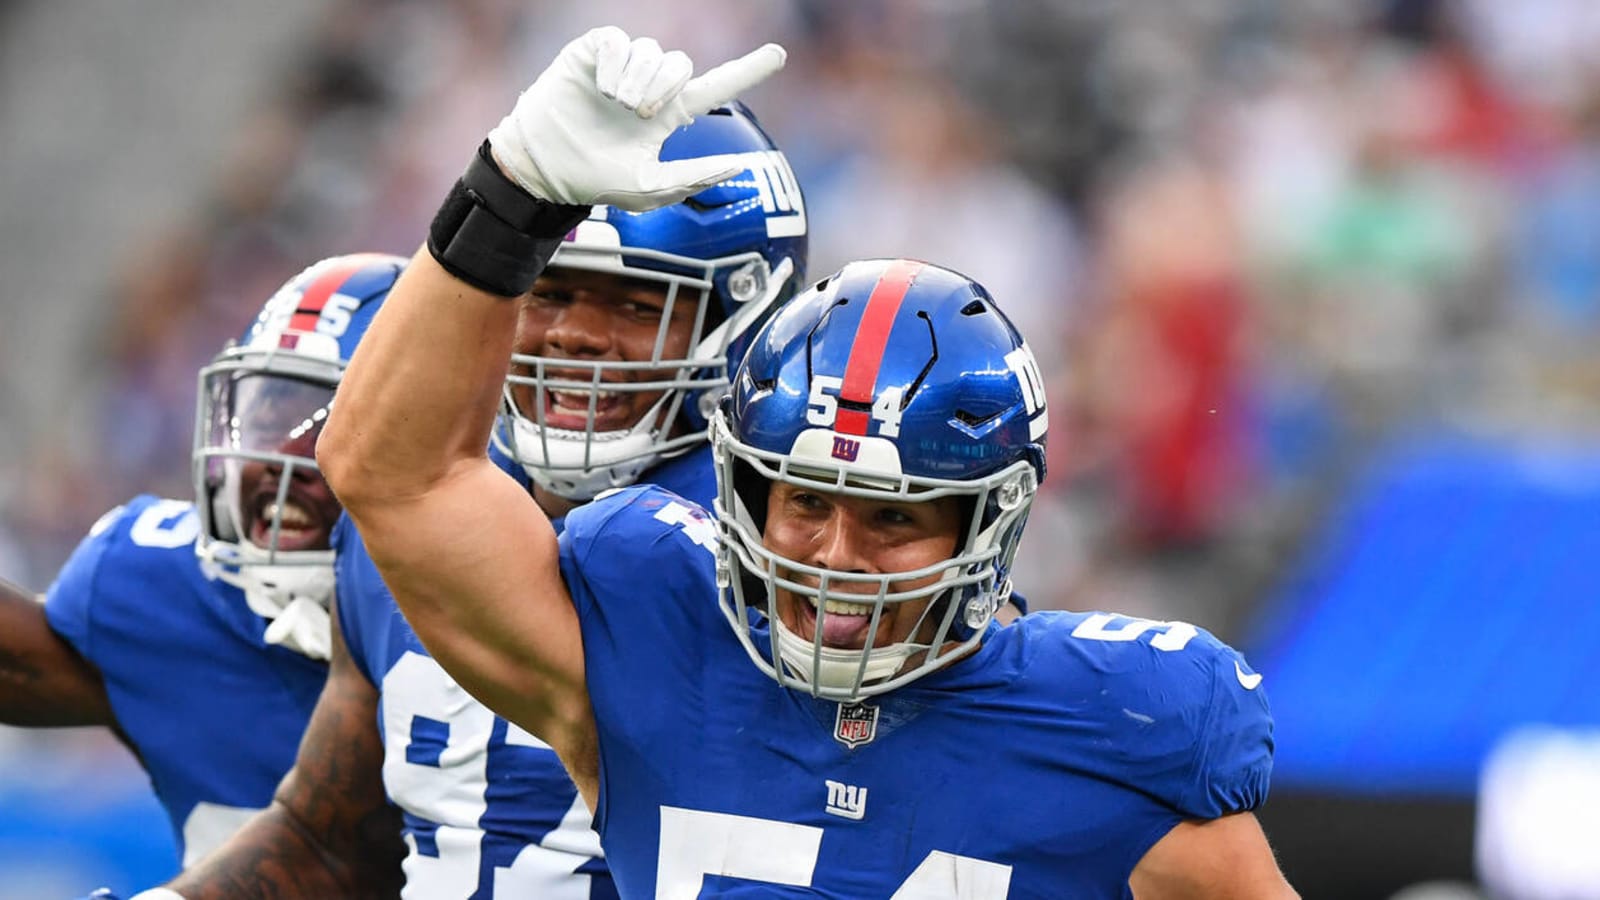 Blake Martinez takes pay cut to stay with Giants